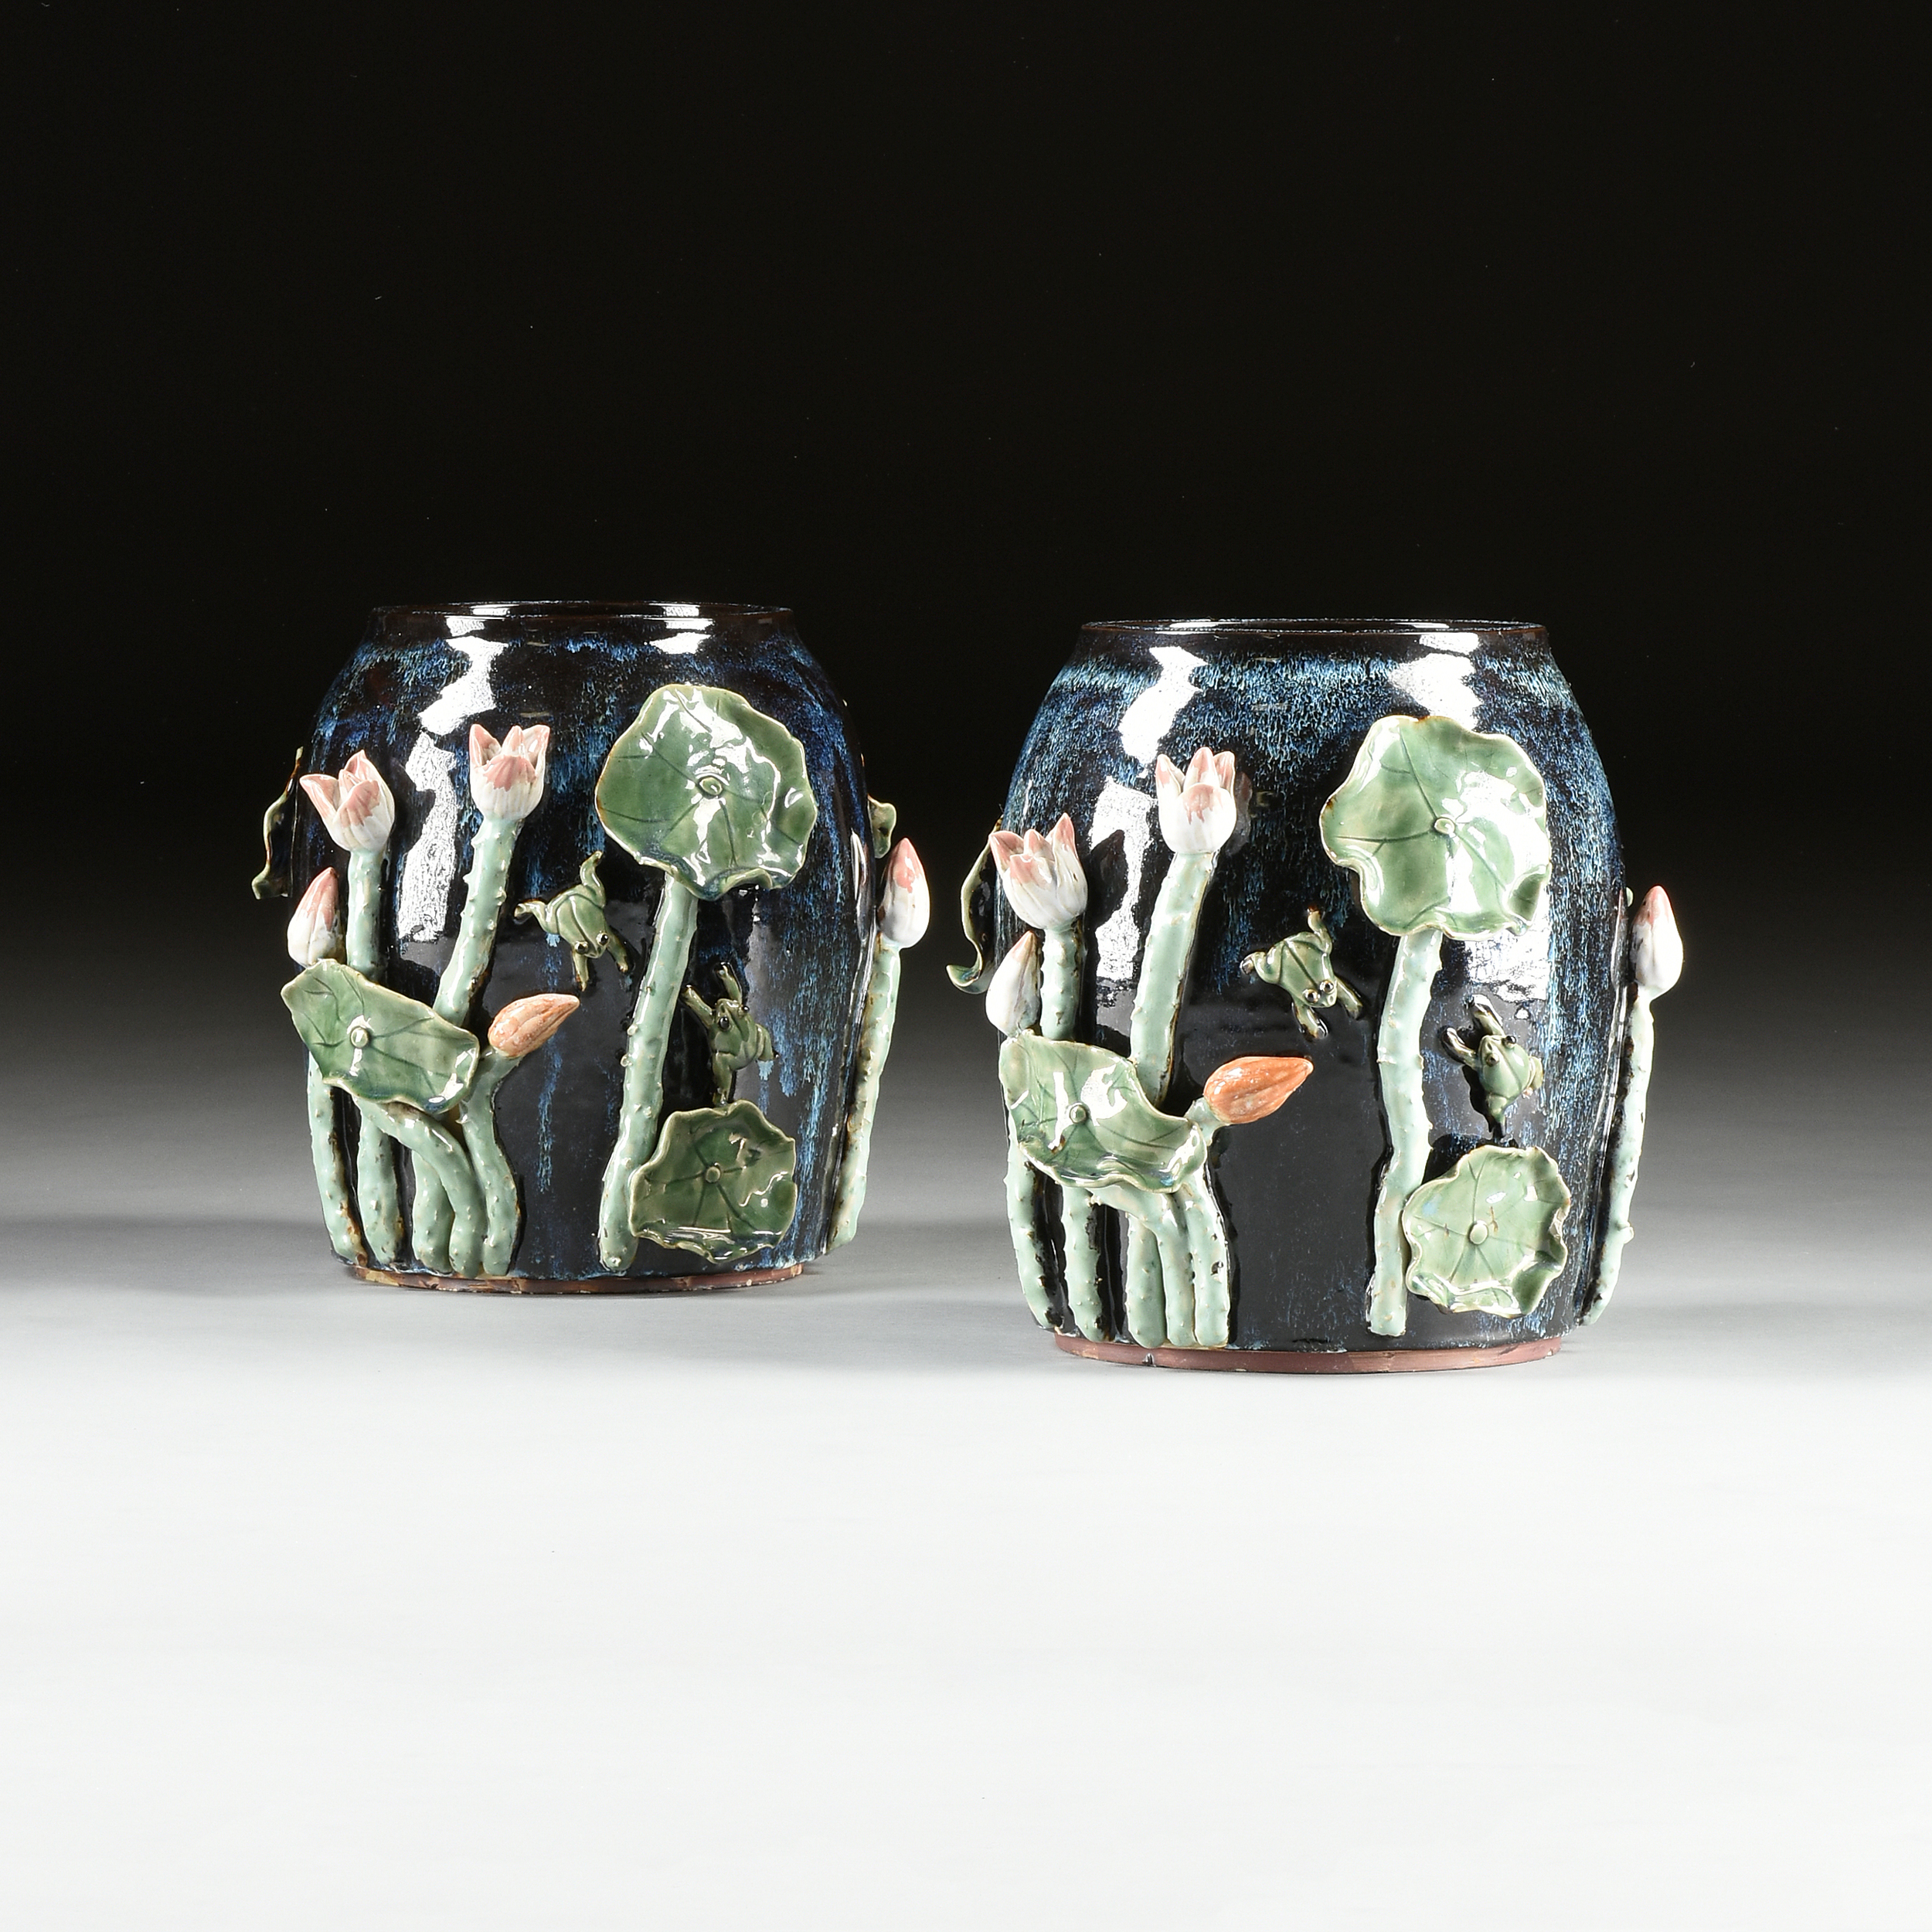 A PAIR OF CHINESE EXPORT RELIEF MOLDED LOTUS AND LEAF GLAZED EARTHENWARE JARDINIÈRES, MODERN,